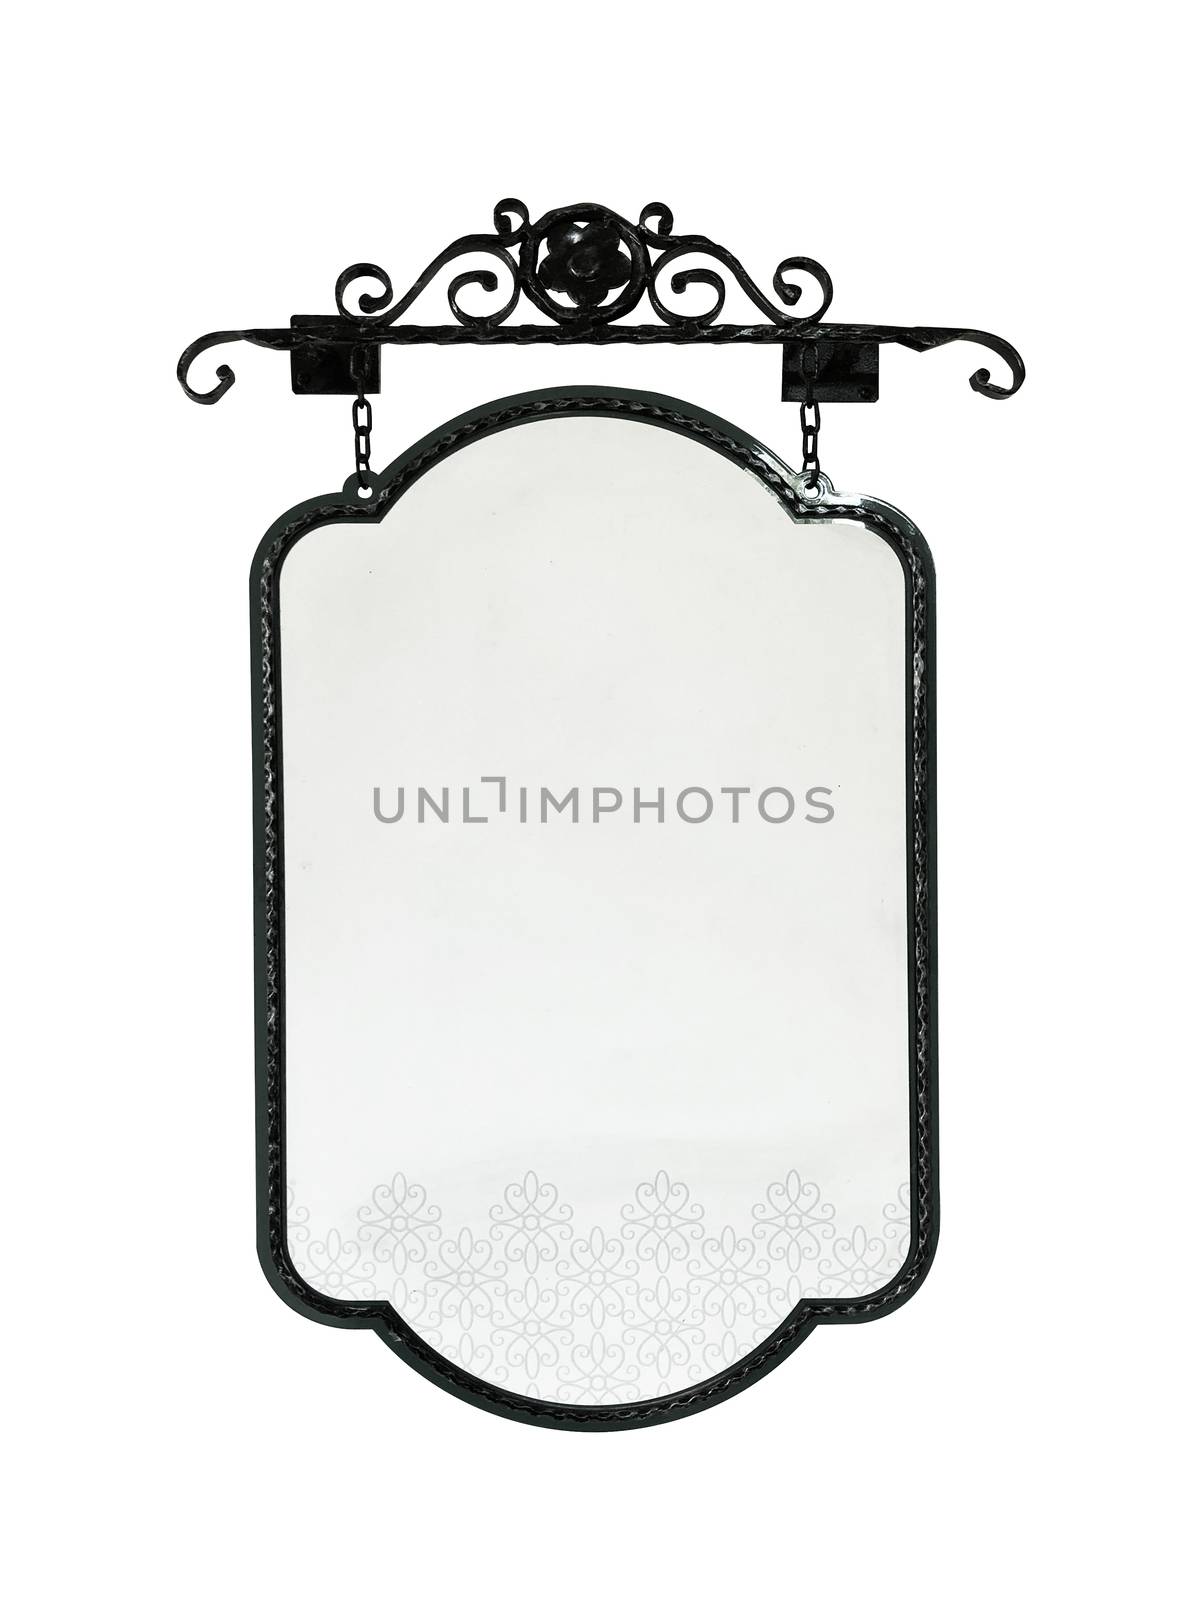 Vintage hanging signboard on white background with space for text and logo.